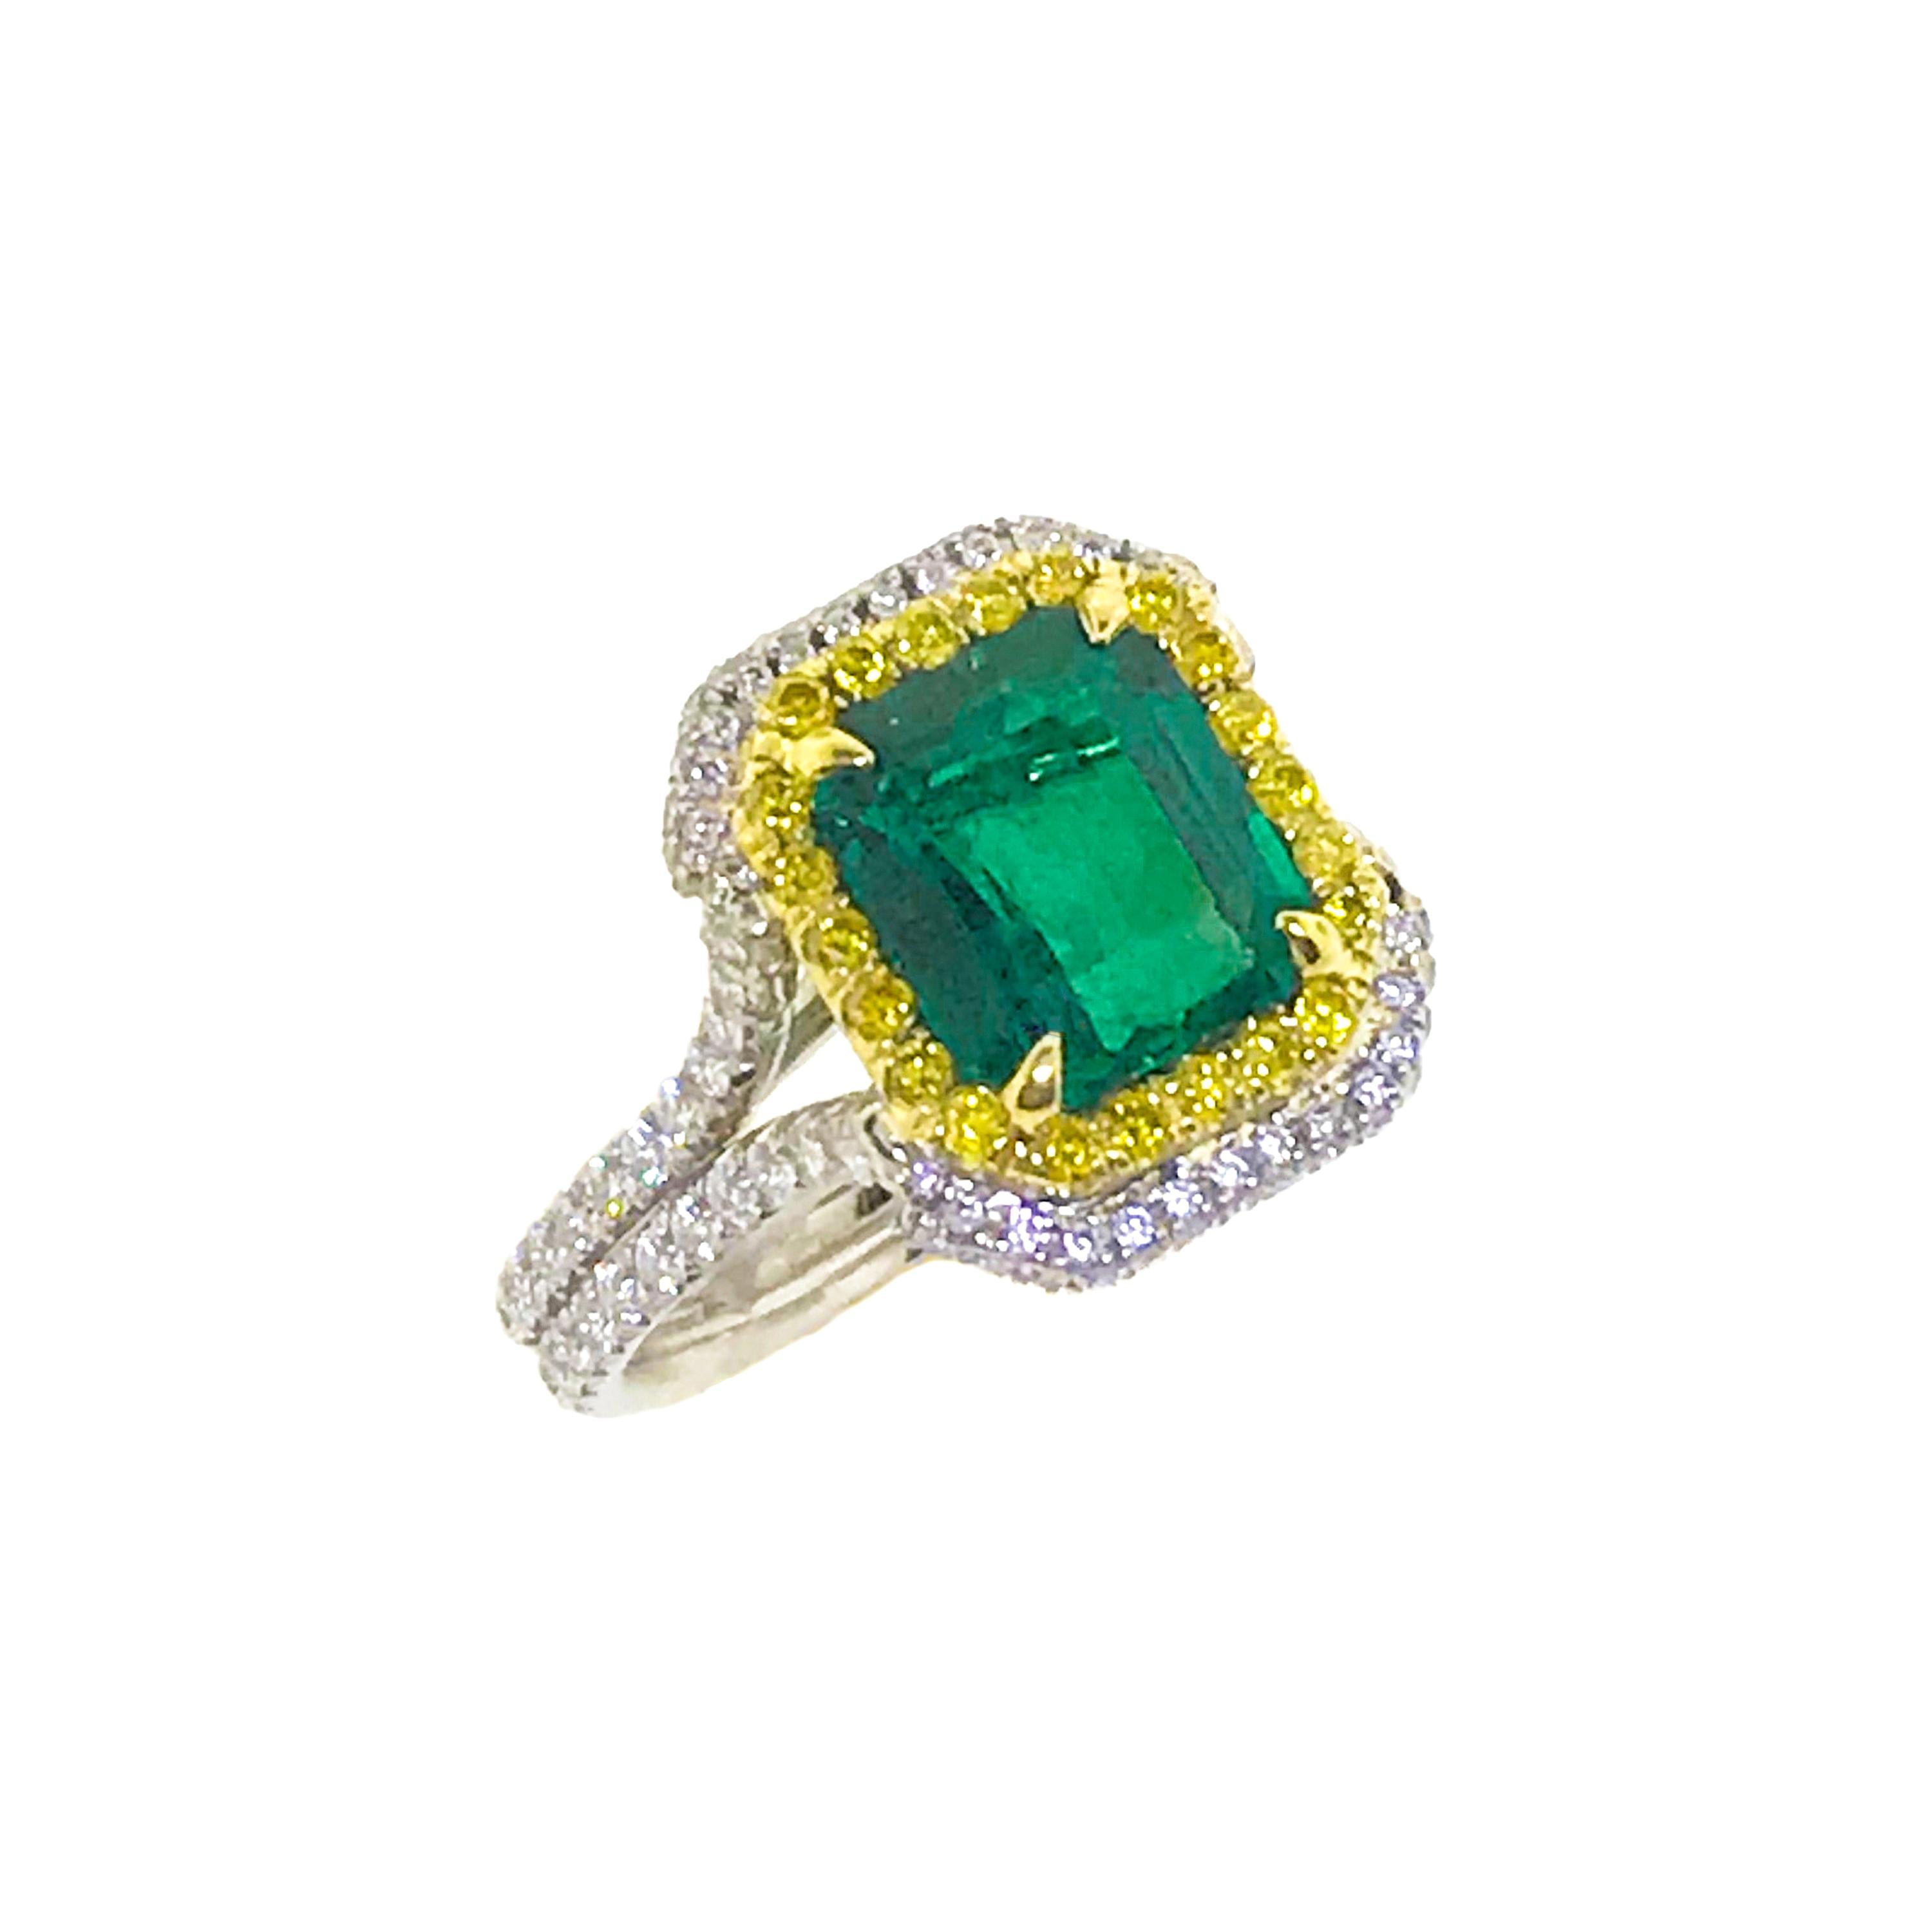 Stunning 2.76 Carat Colombian Emerald and Diamond Ring For Sale